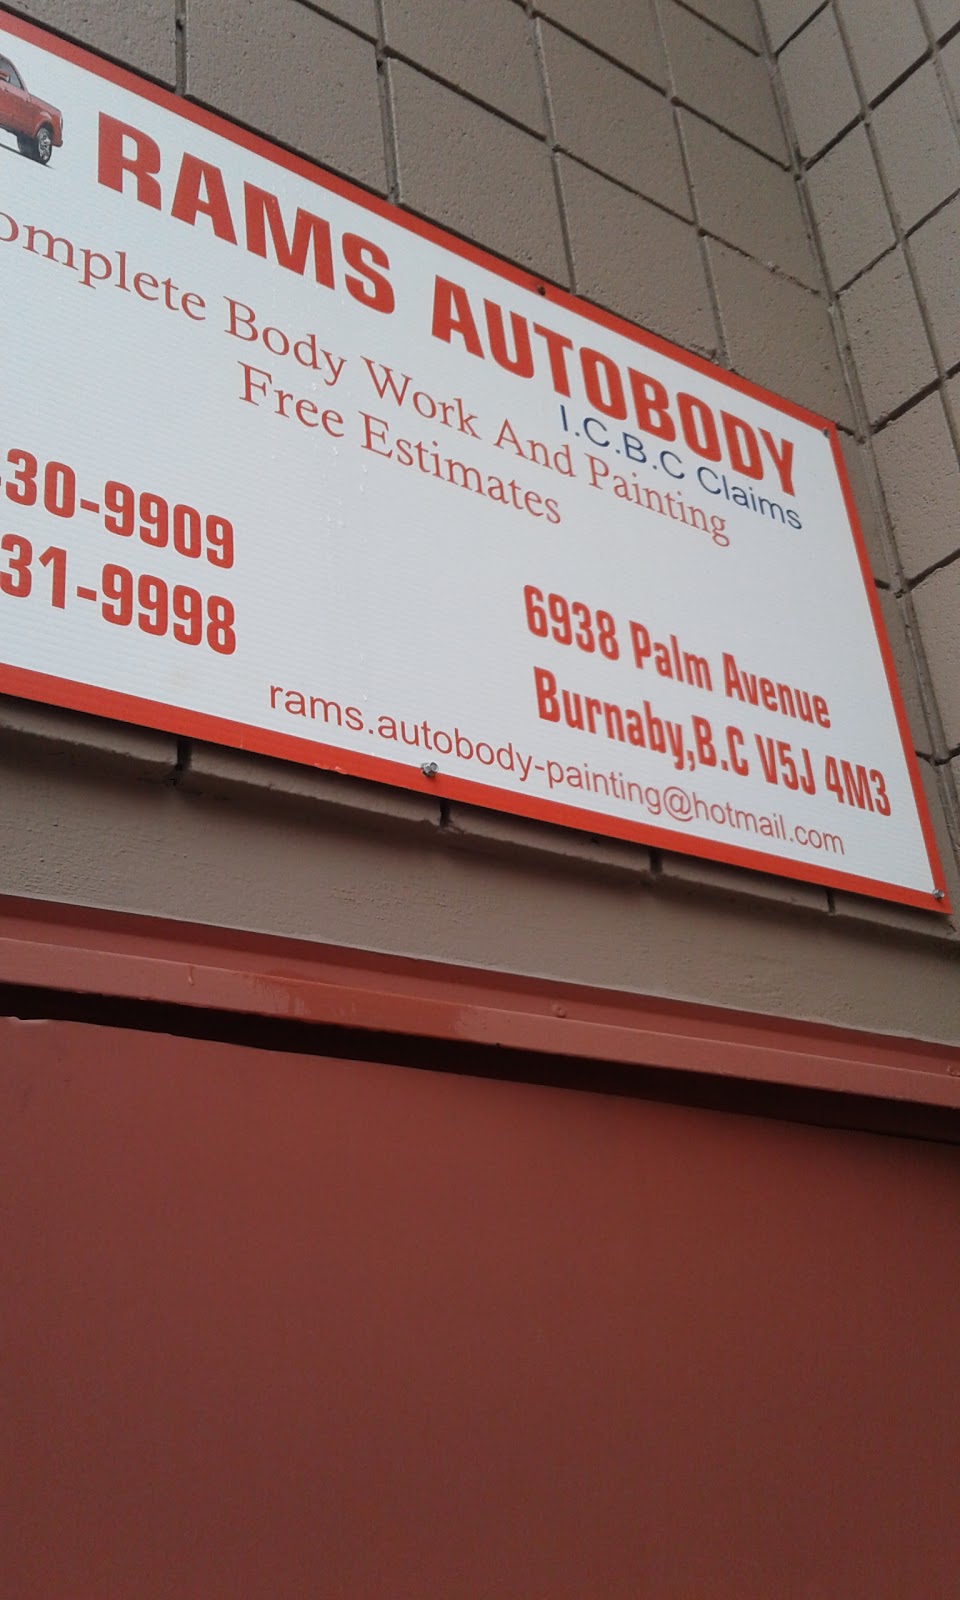 Rams Autobody & Painting | 6938 Palm Ave, Burnaby, BC V5J 4M3, Canada | Phone: (604) 430-9909